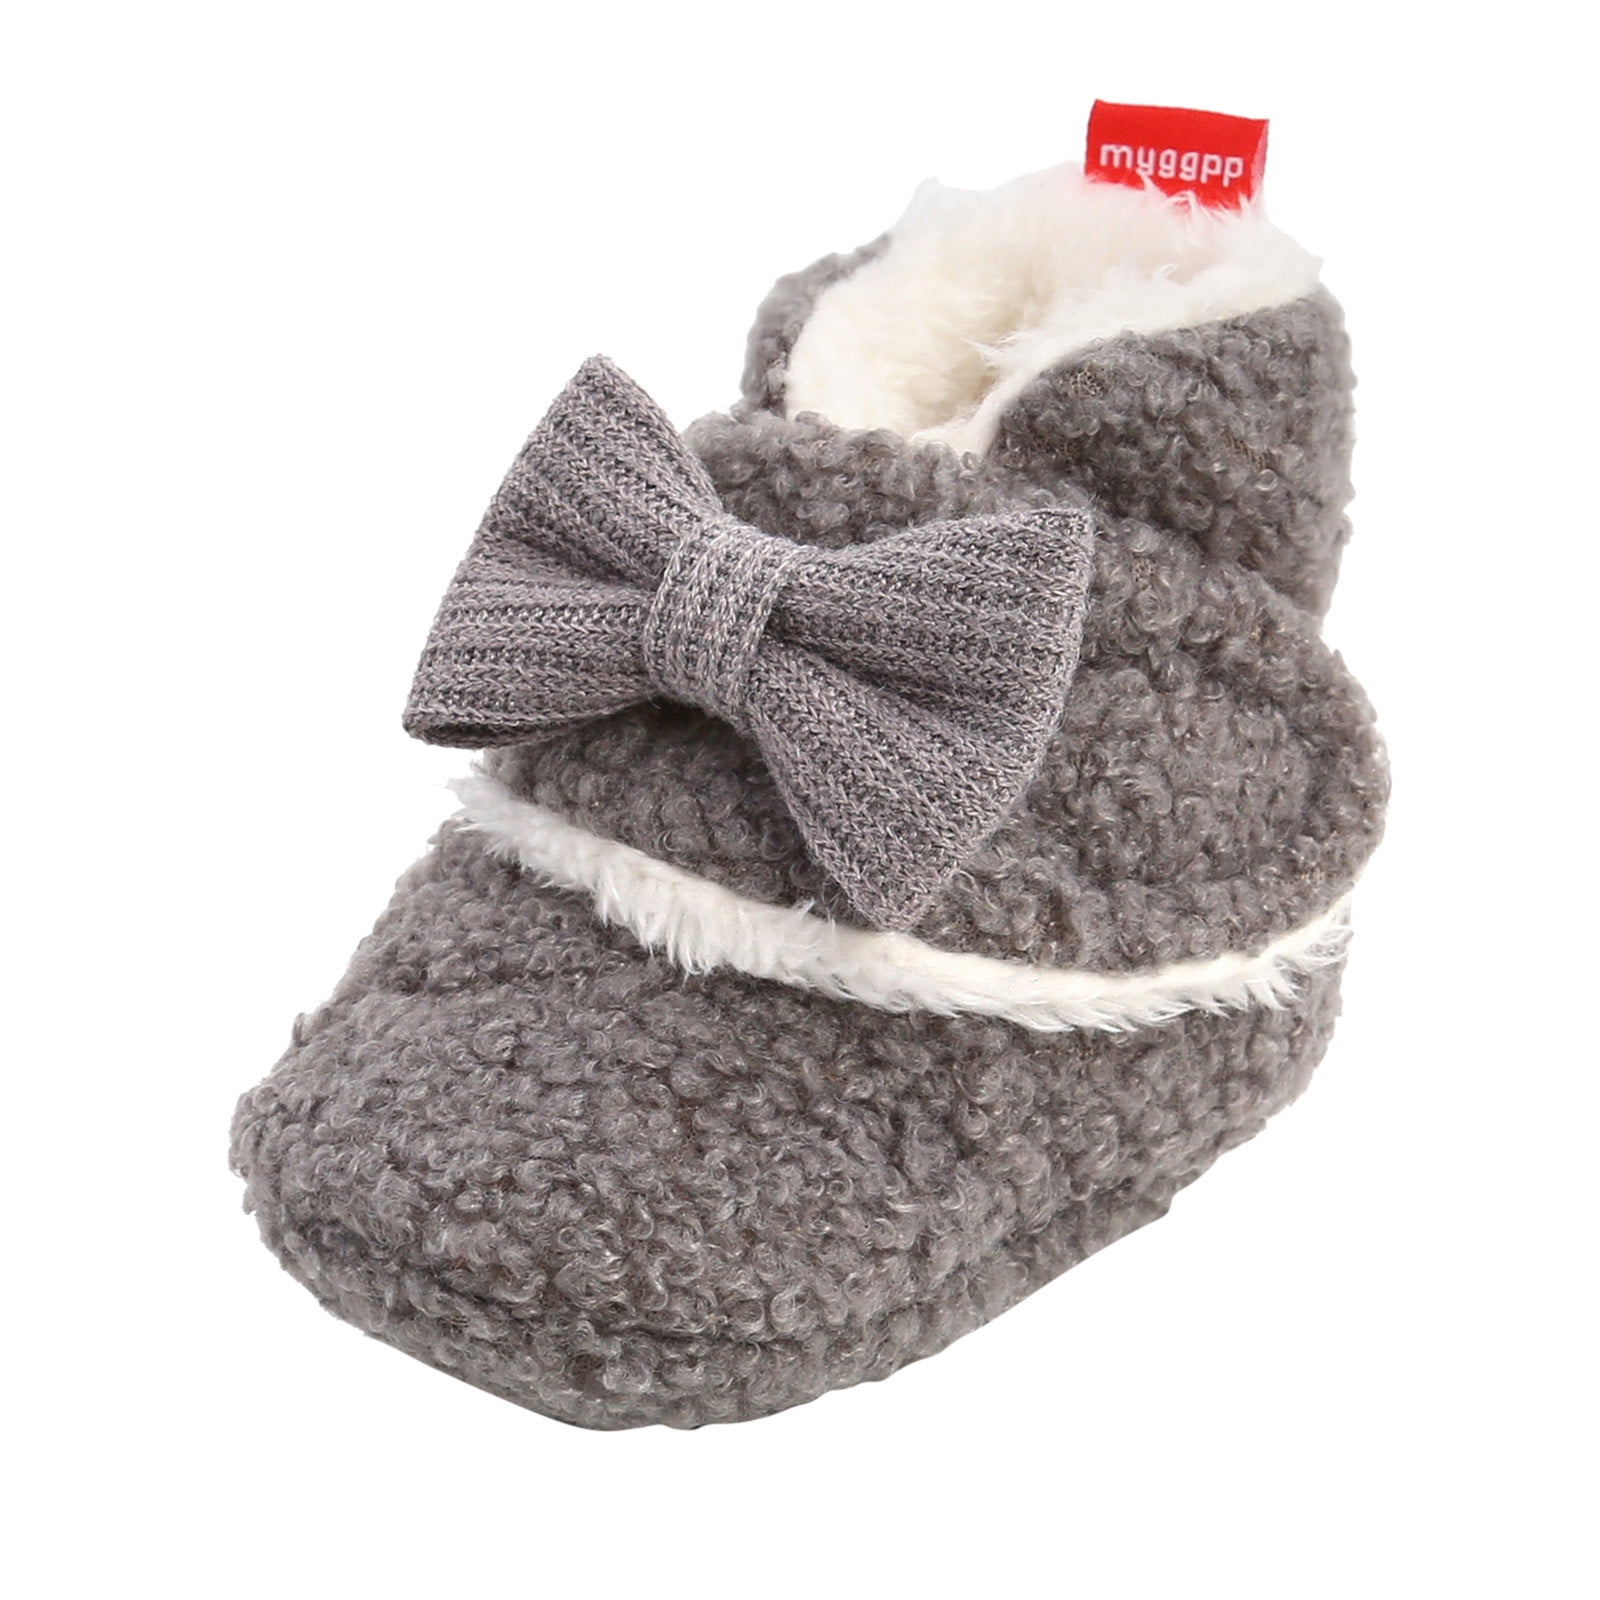 Cotton Lining Soft Suede Infant Boots Non-Slip Toddler First Walker Shoes Winter Socks SOFMUO Baby Girls Boys Fleece Booties